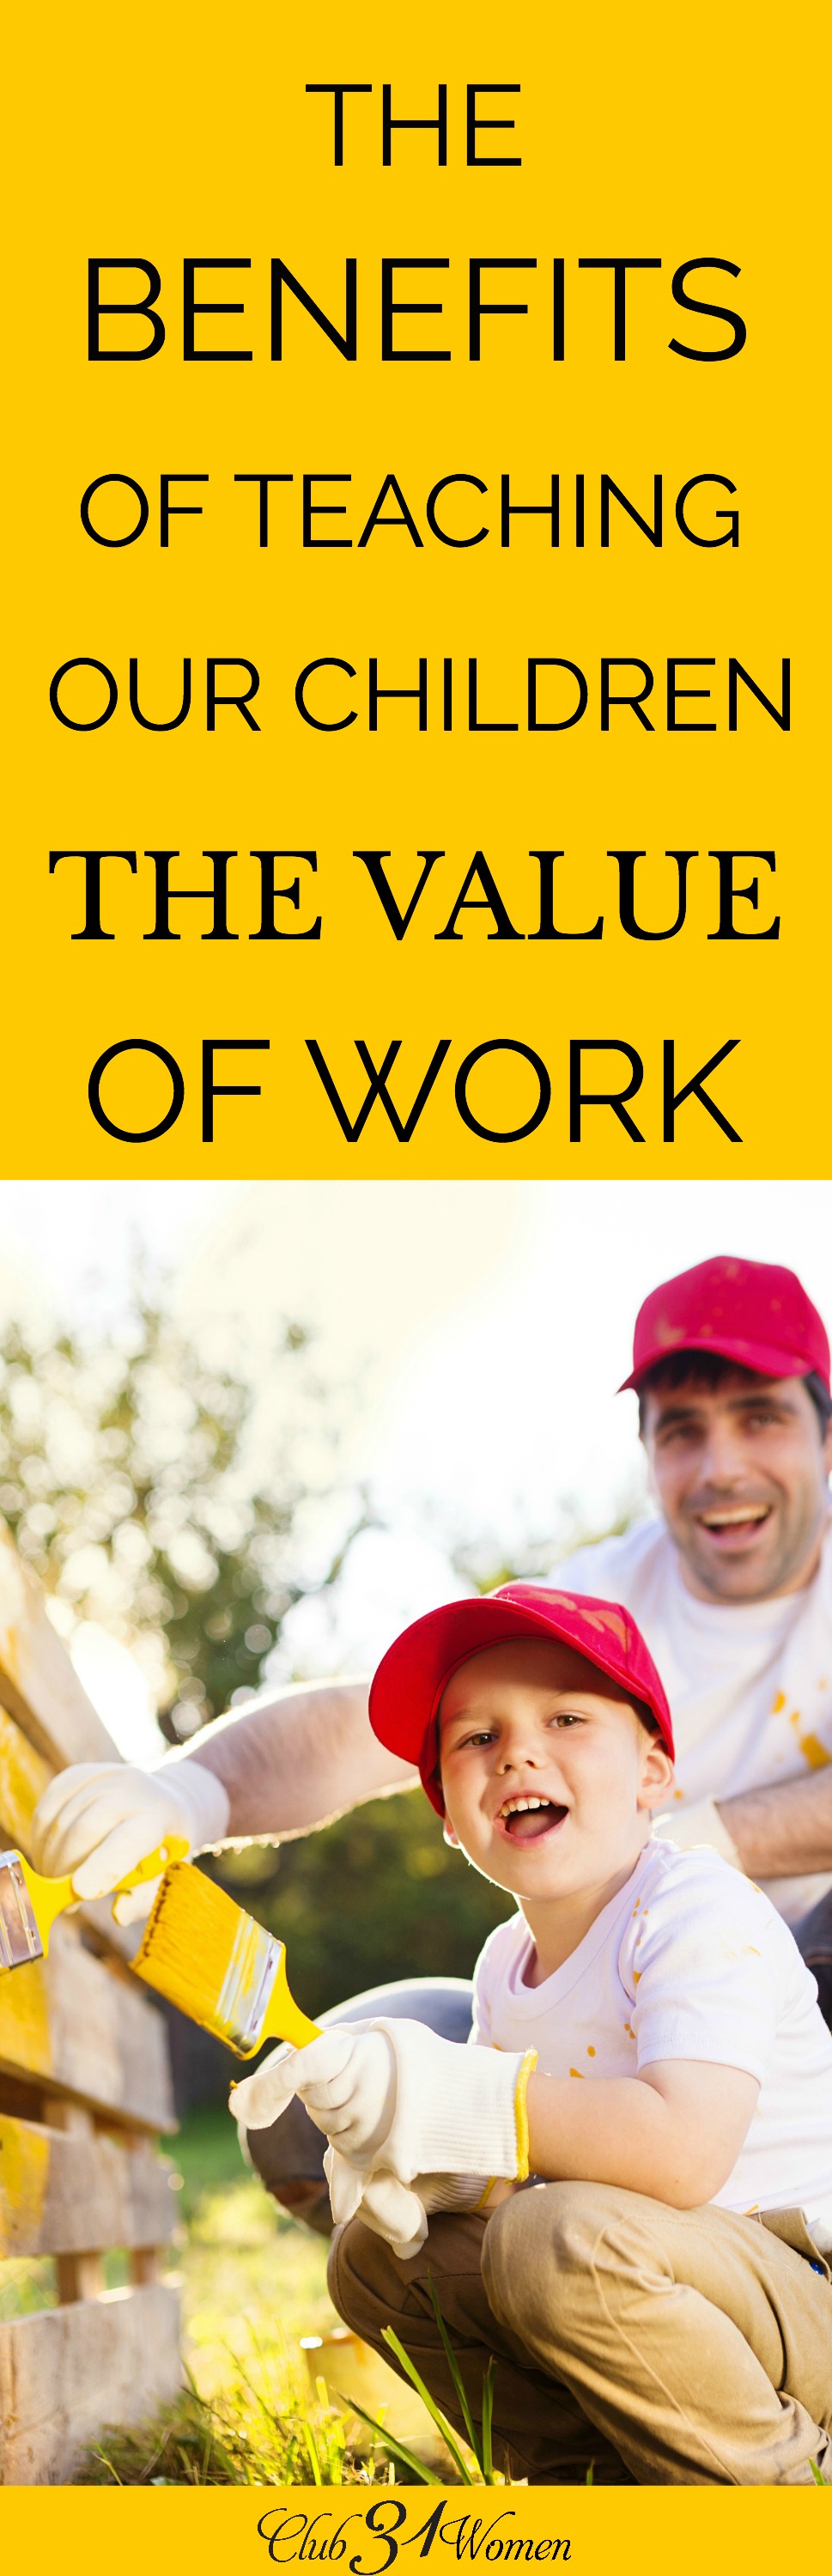 Hard work can be very rewarding when we are taught the value of it. What are the benefits of teaching our children the value of hard work? via @Club31Women